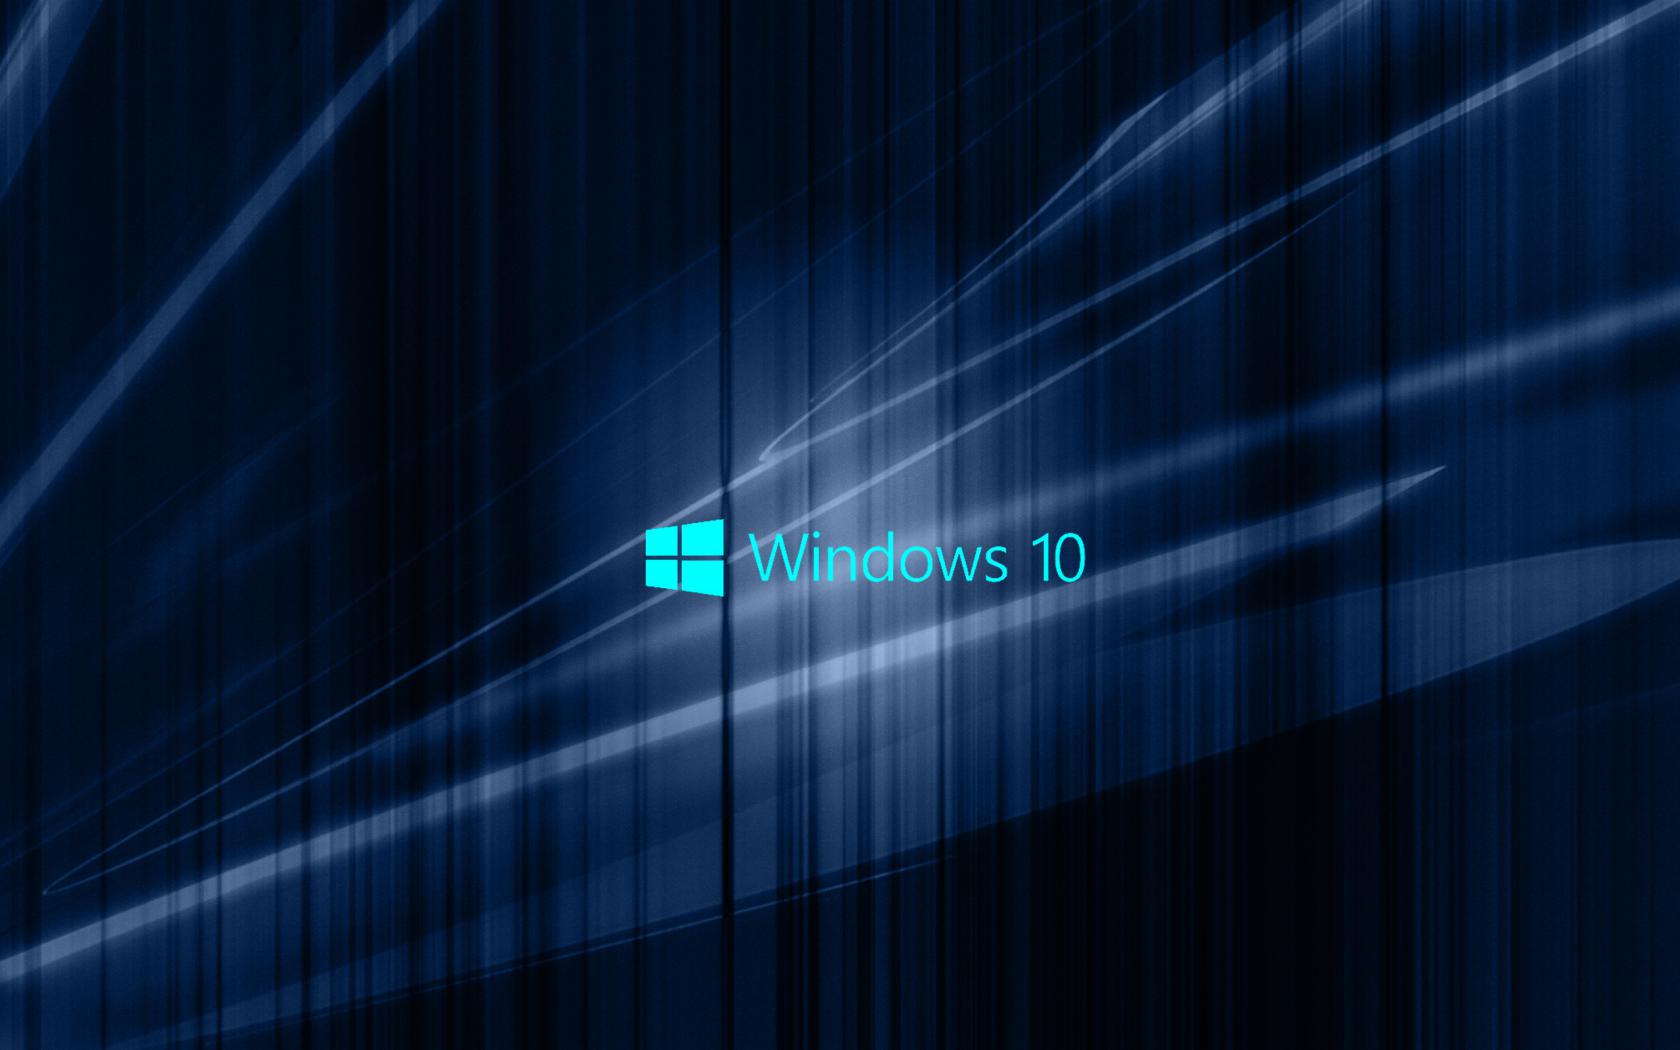 Windows 10 Wallpaper with Blue Abstract Waves HD Wallpapers for Free